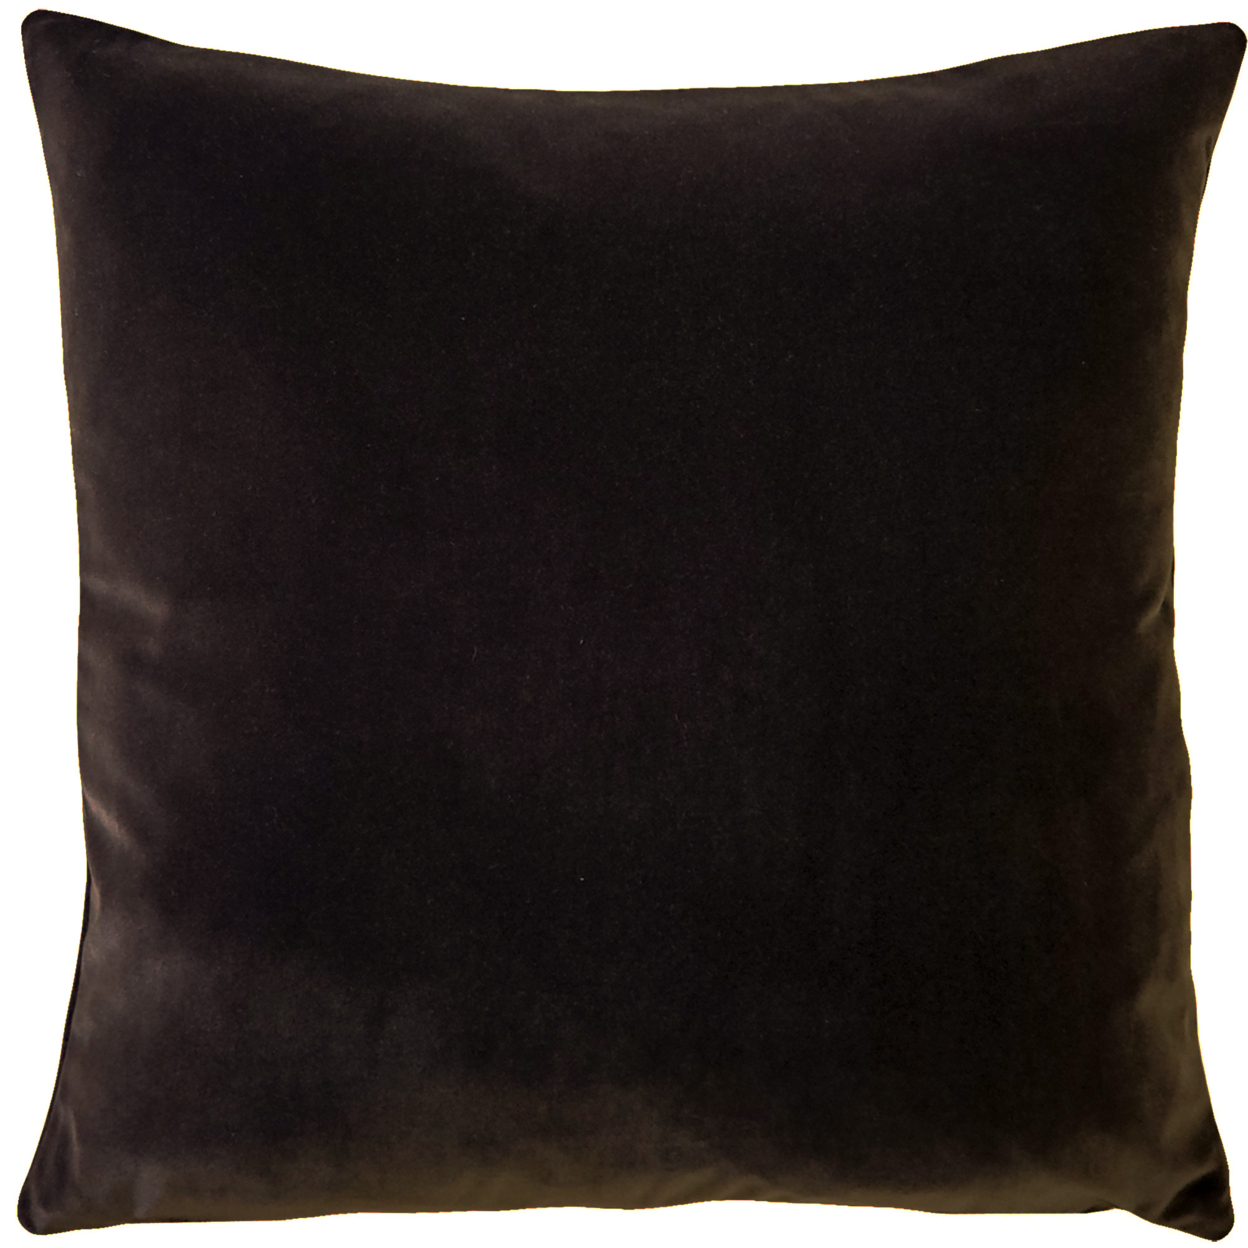 Castello Velvet Throw Pillows, Complete Pillow With Polyfill Pillow Insert (18 Colors, 3 Sizes) - Black, 17x17